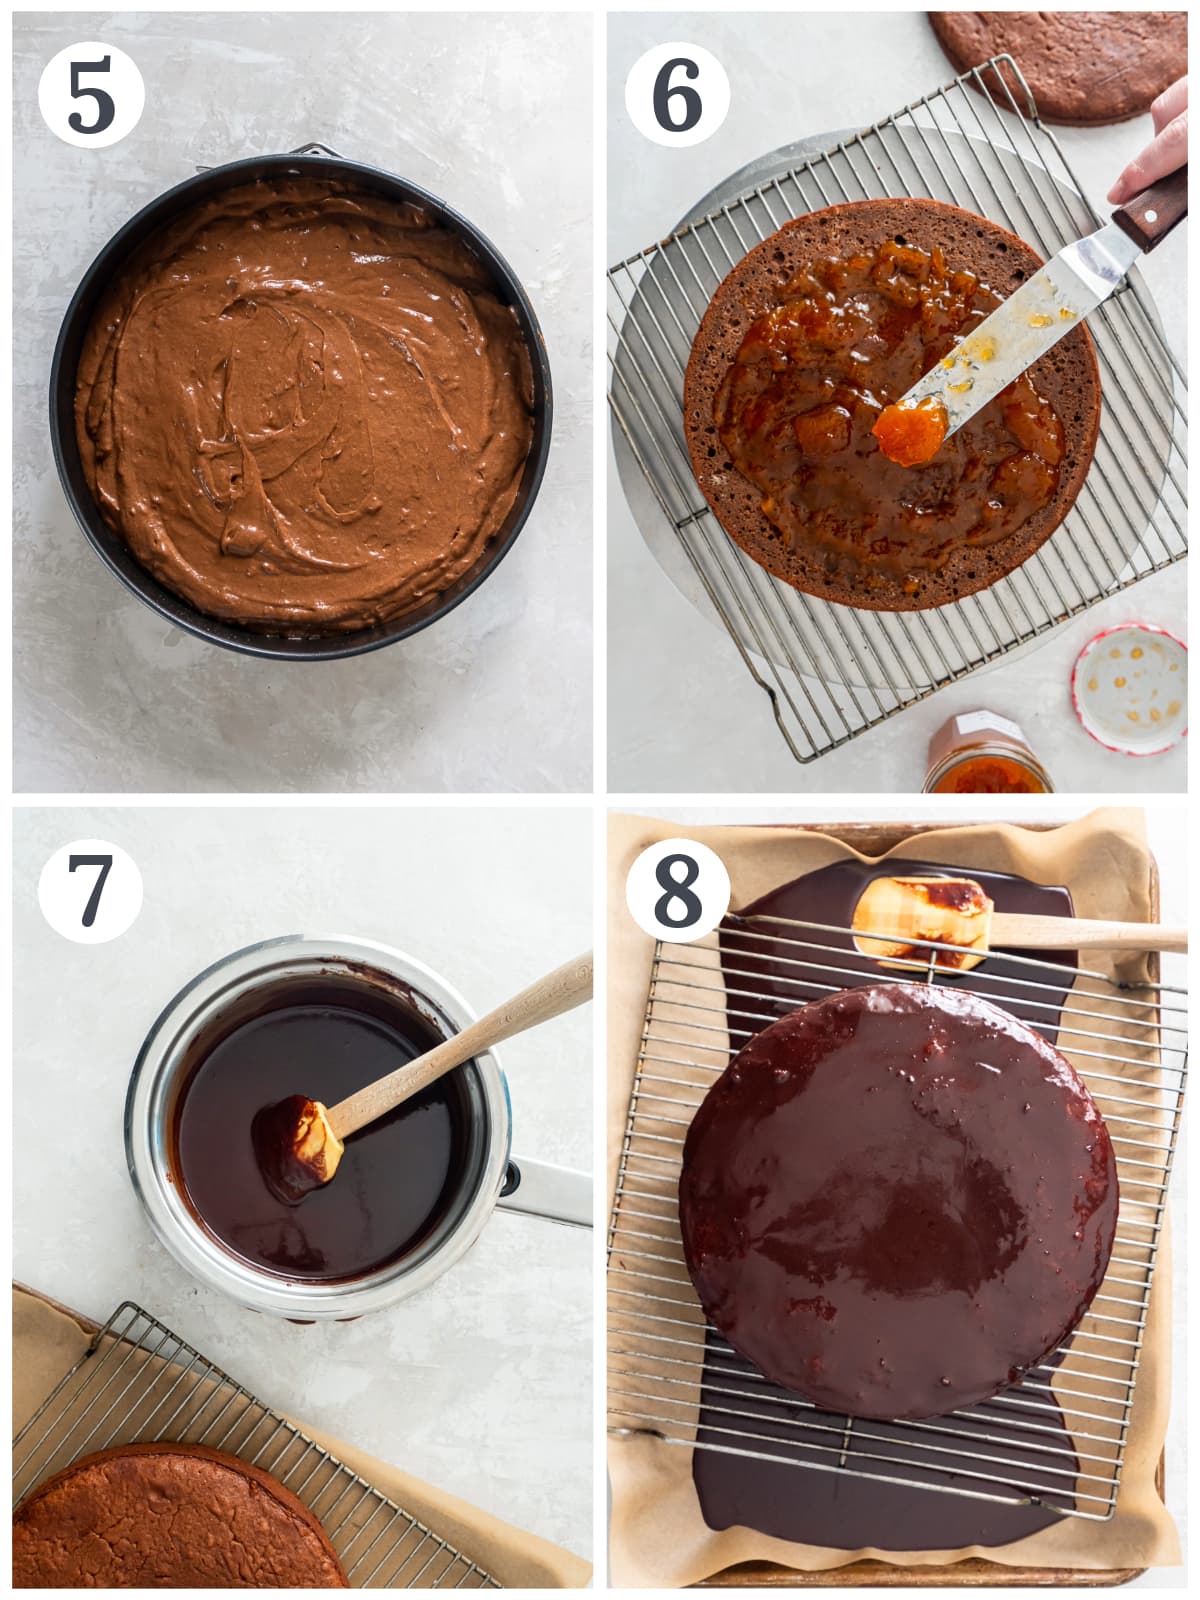 photo collage demonstrating how to assemble sacher torte with apricot jam and make chocolate glaze.